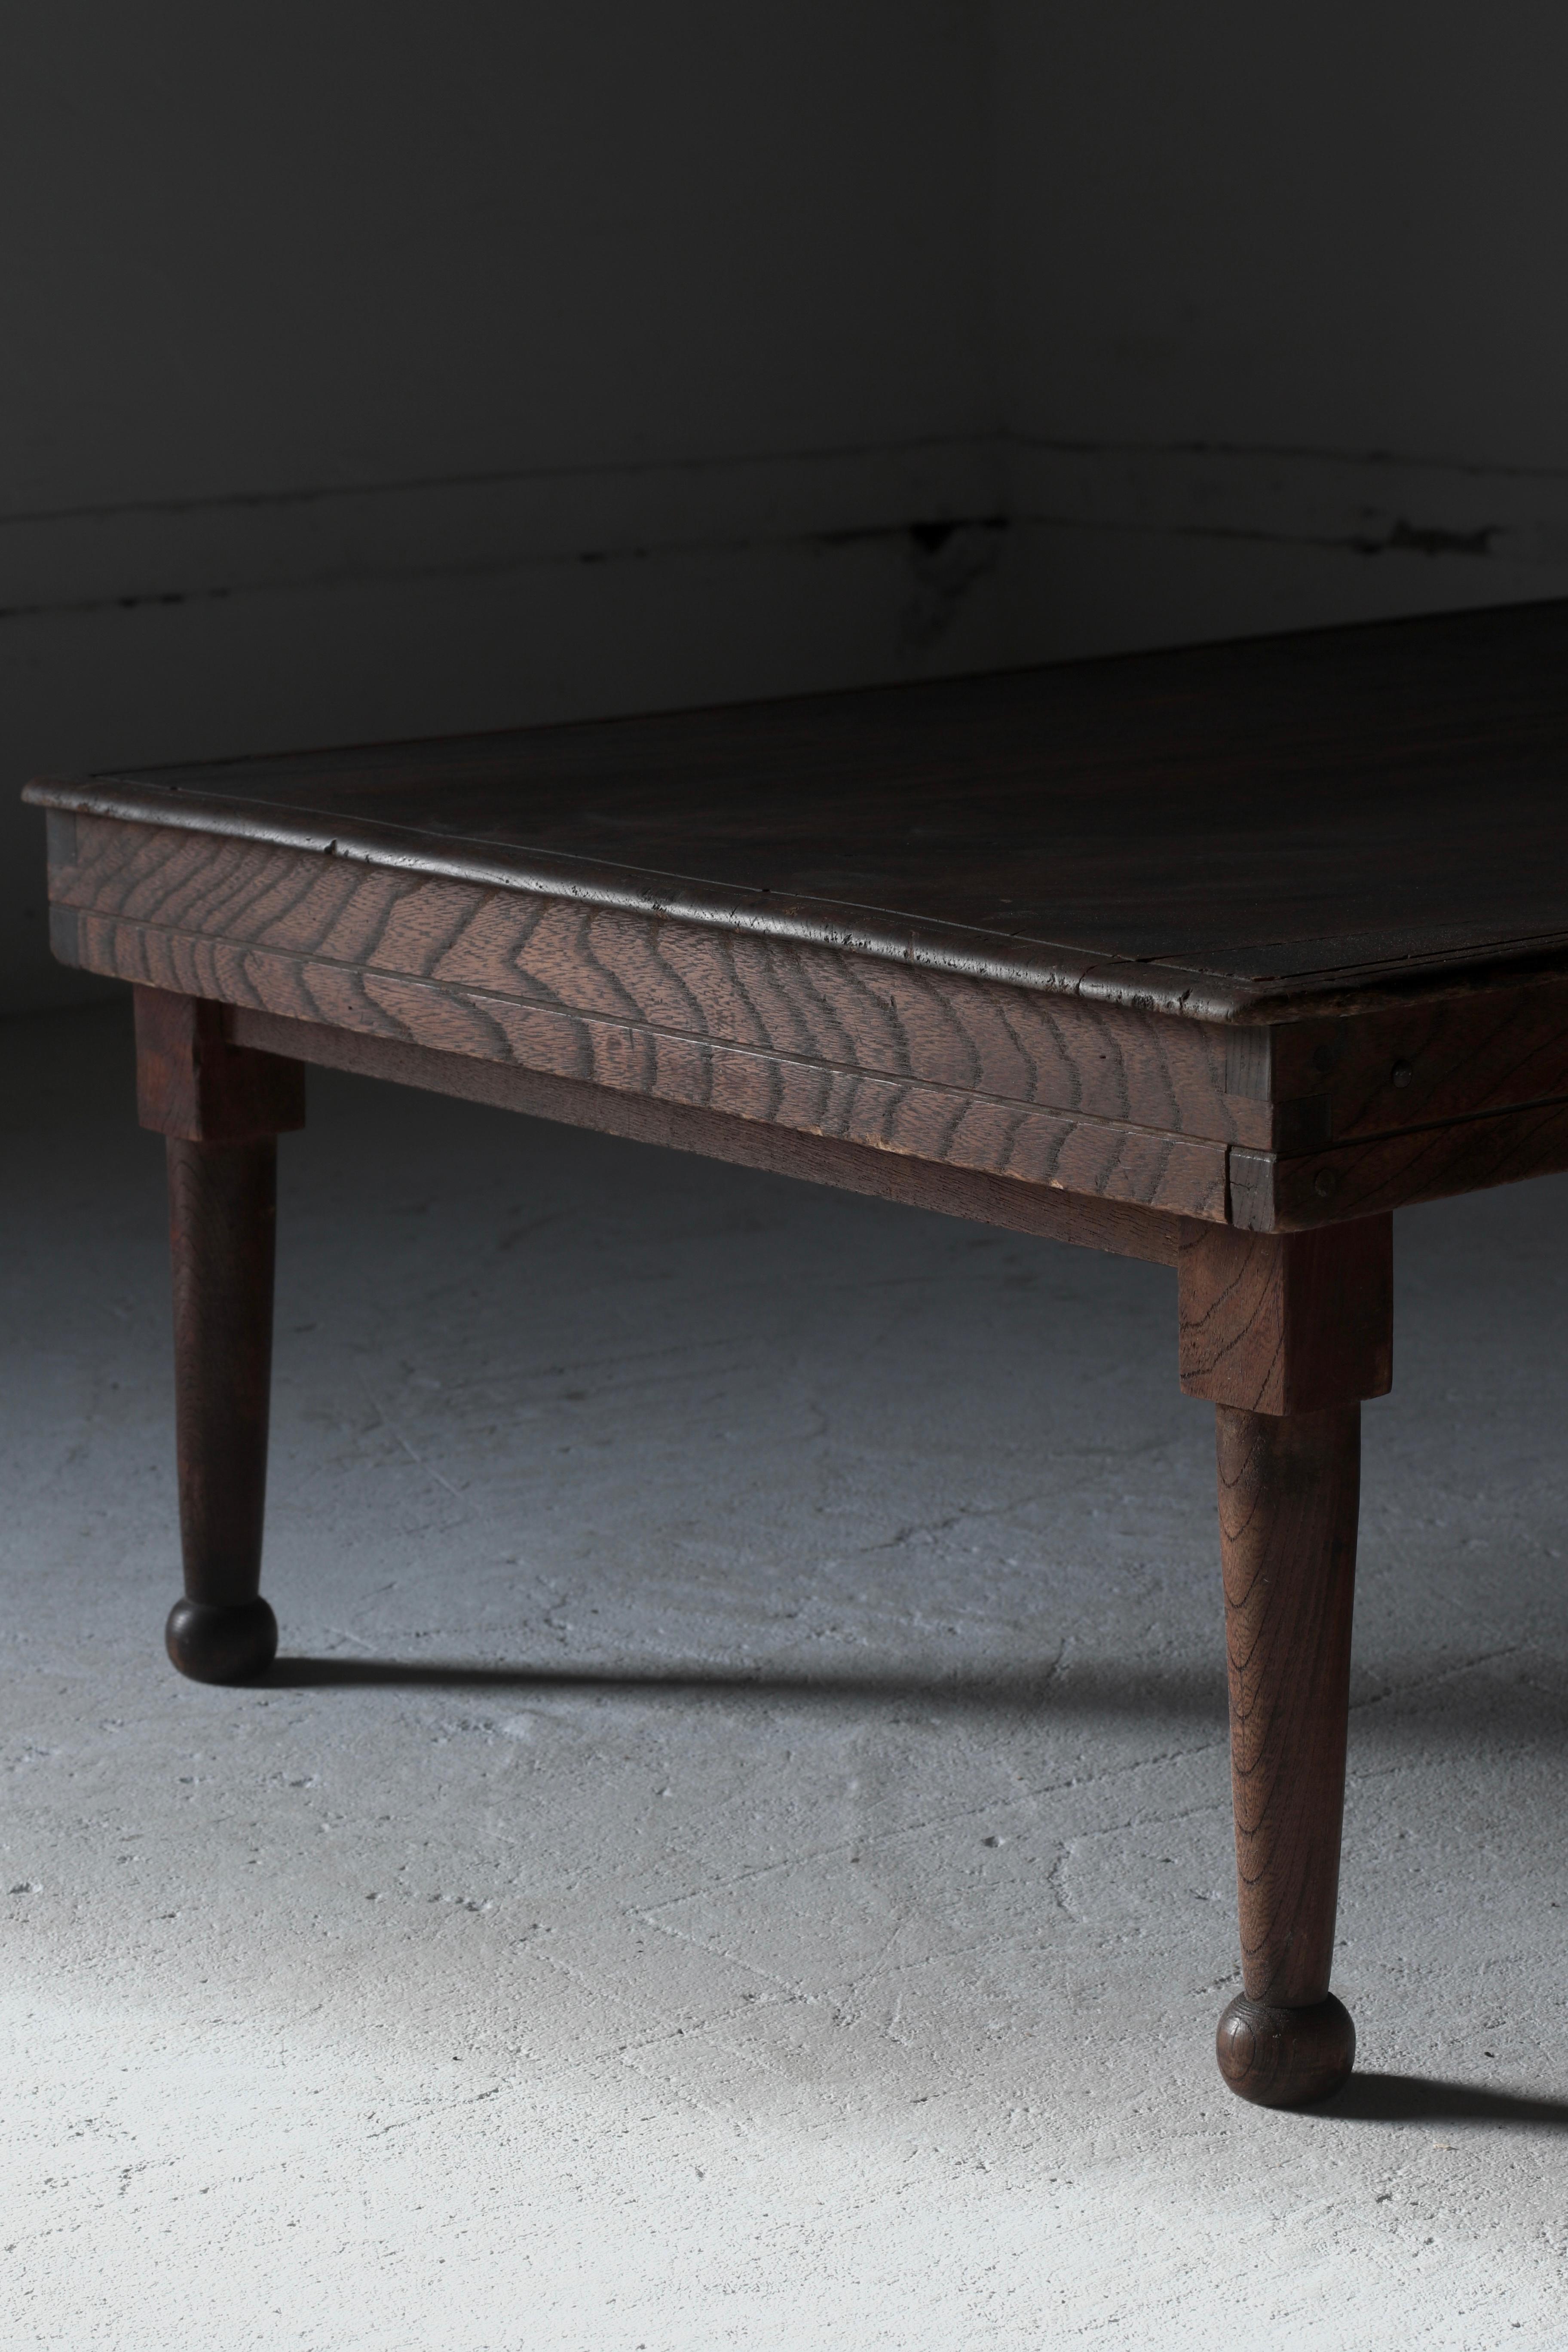 It's an old low table that can be folded.
Iron is used for the folding framework.
The wood used is castor aralia.
The round legs are cute and very rare.

There is an old paper on the back of the table, and the characters used in the old days called